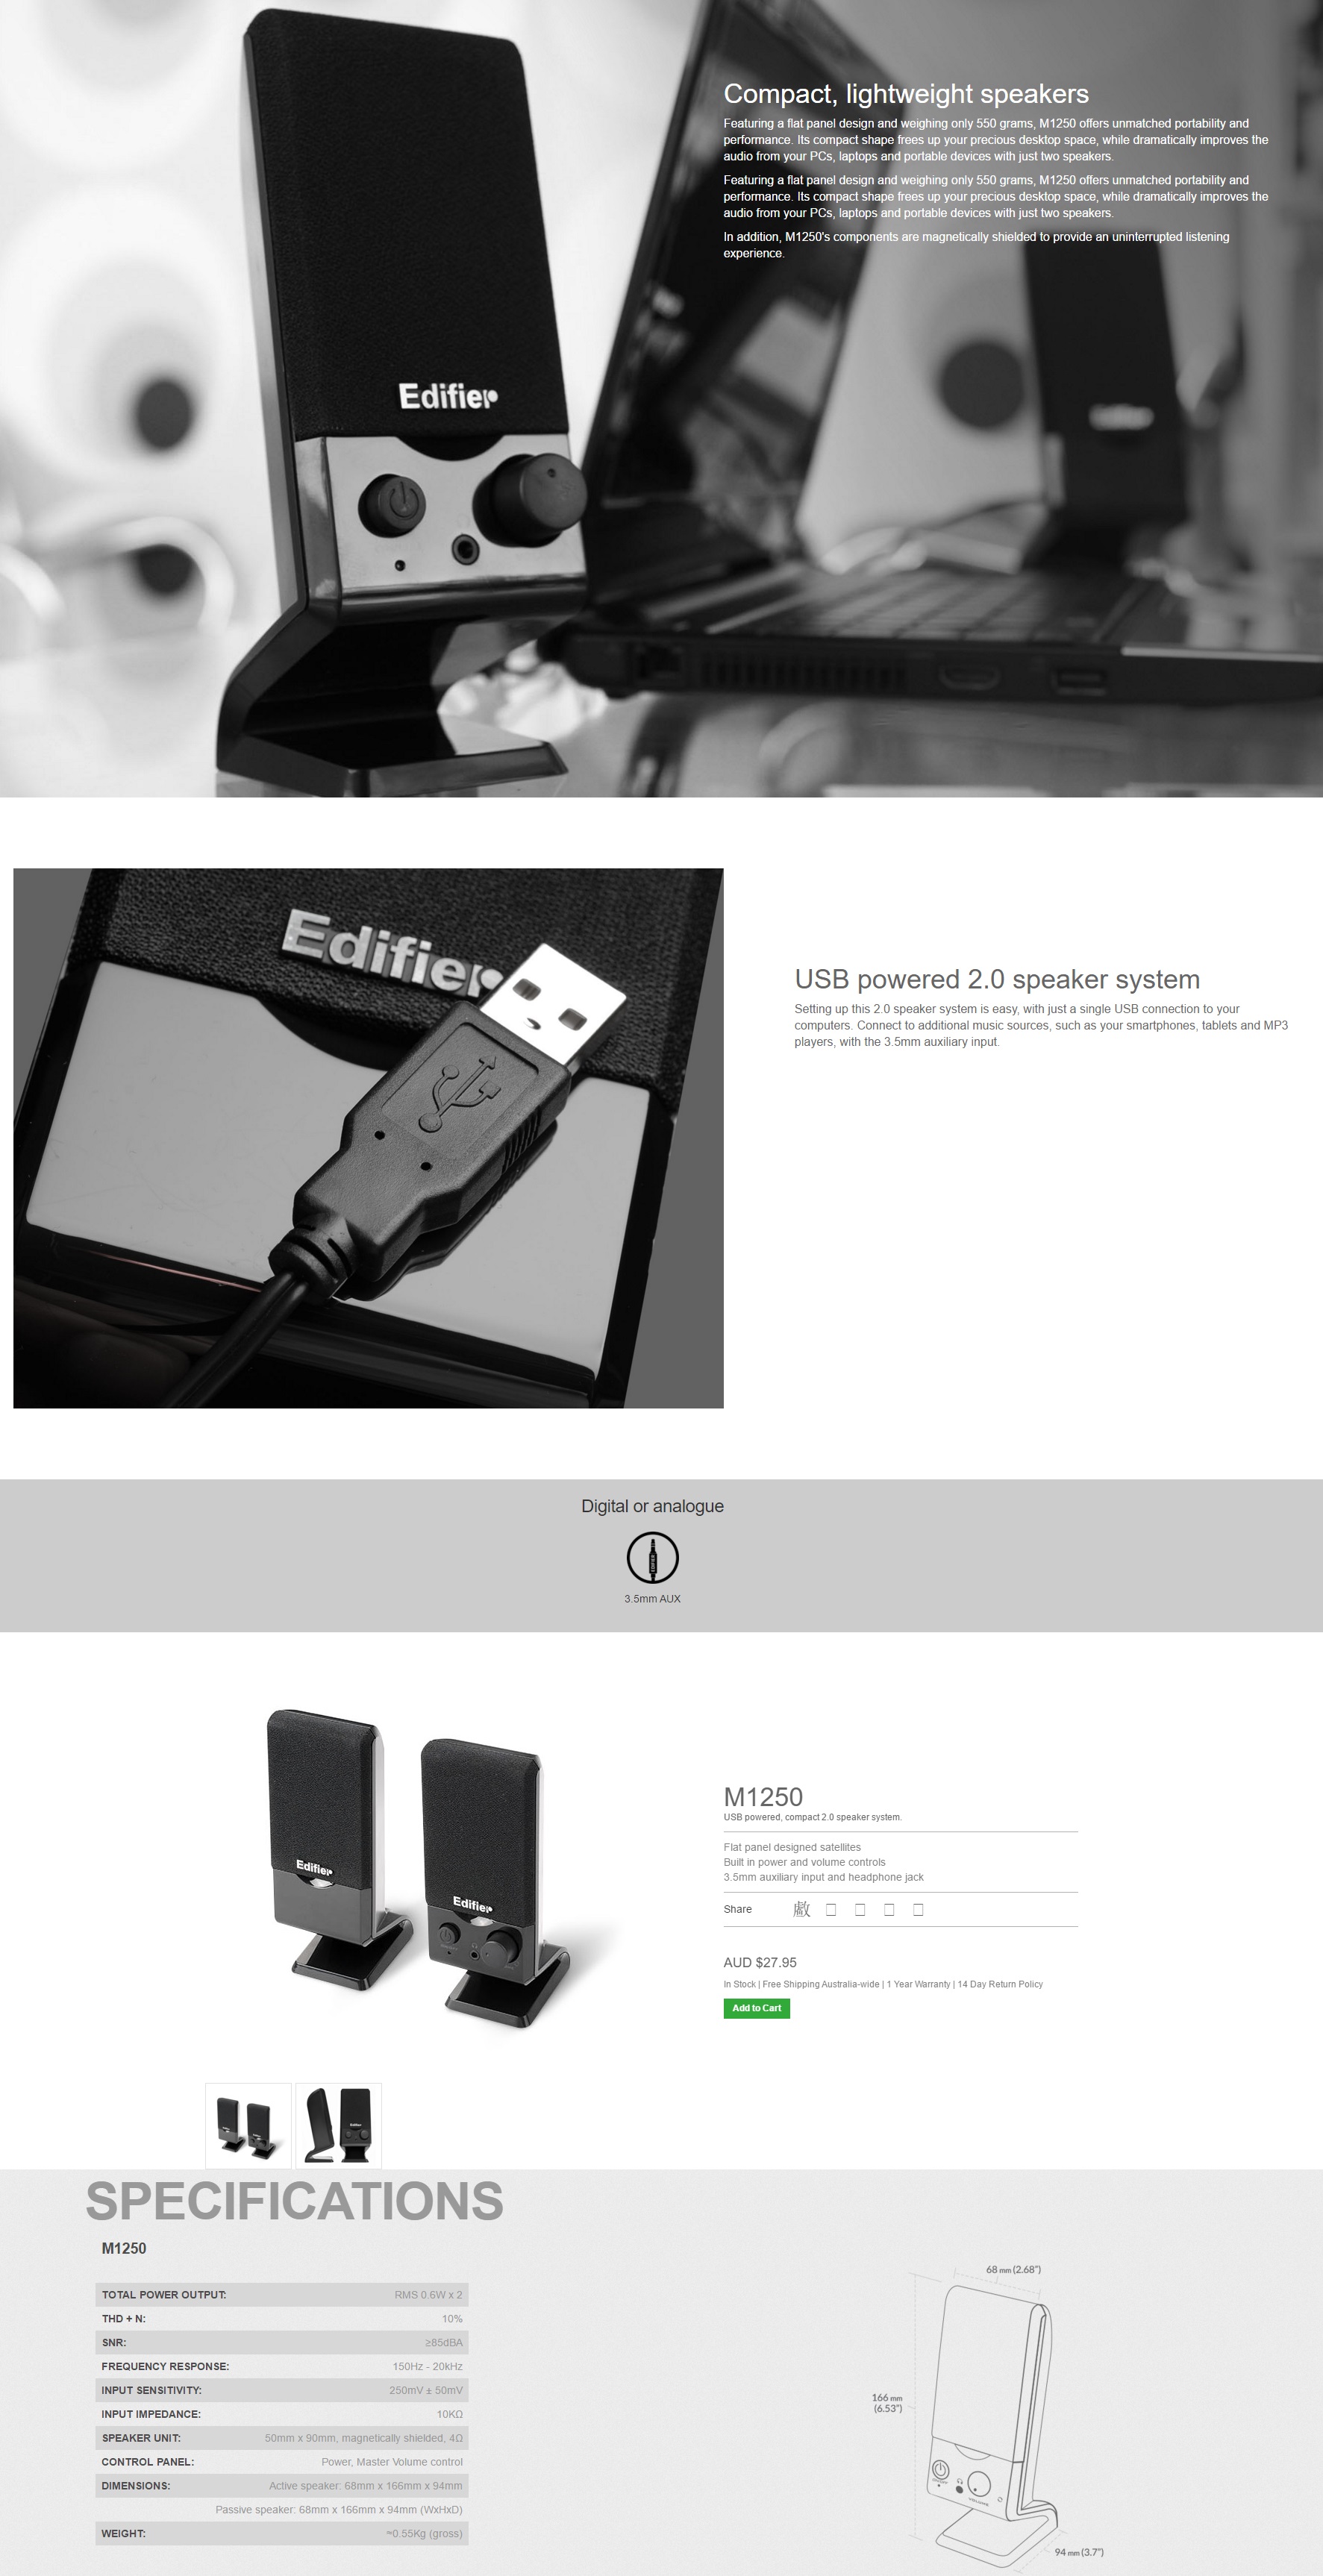 A large marketing image providing additional information about the product Edifier M1250 2.0 USB Speakers - Additional alt info not provided